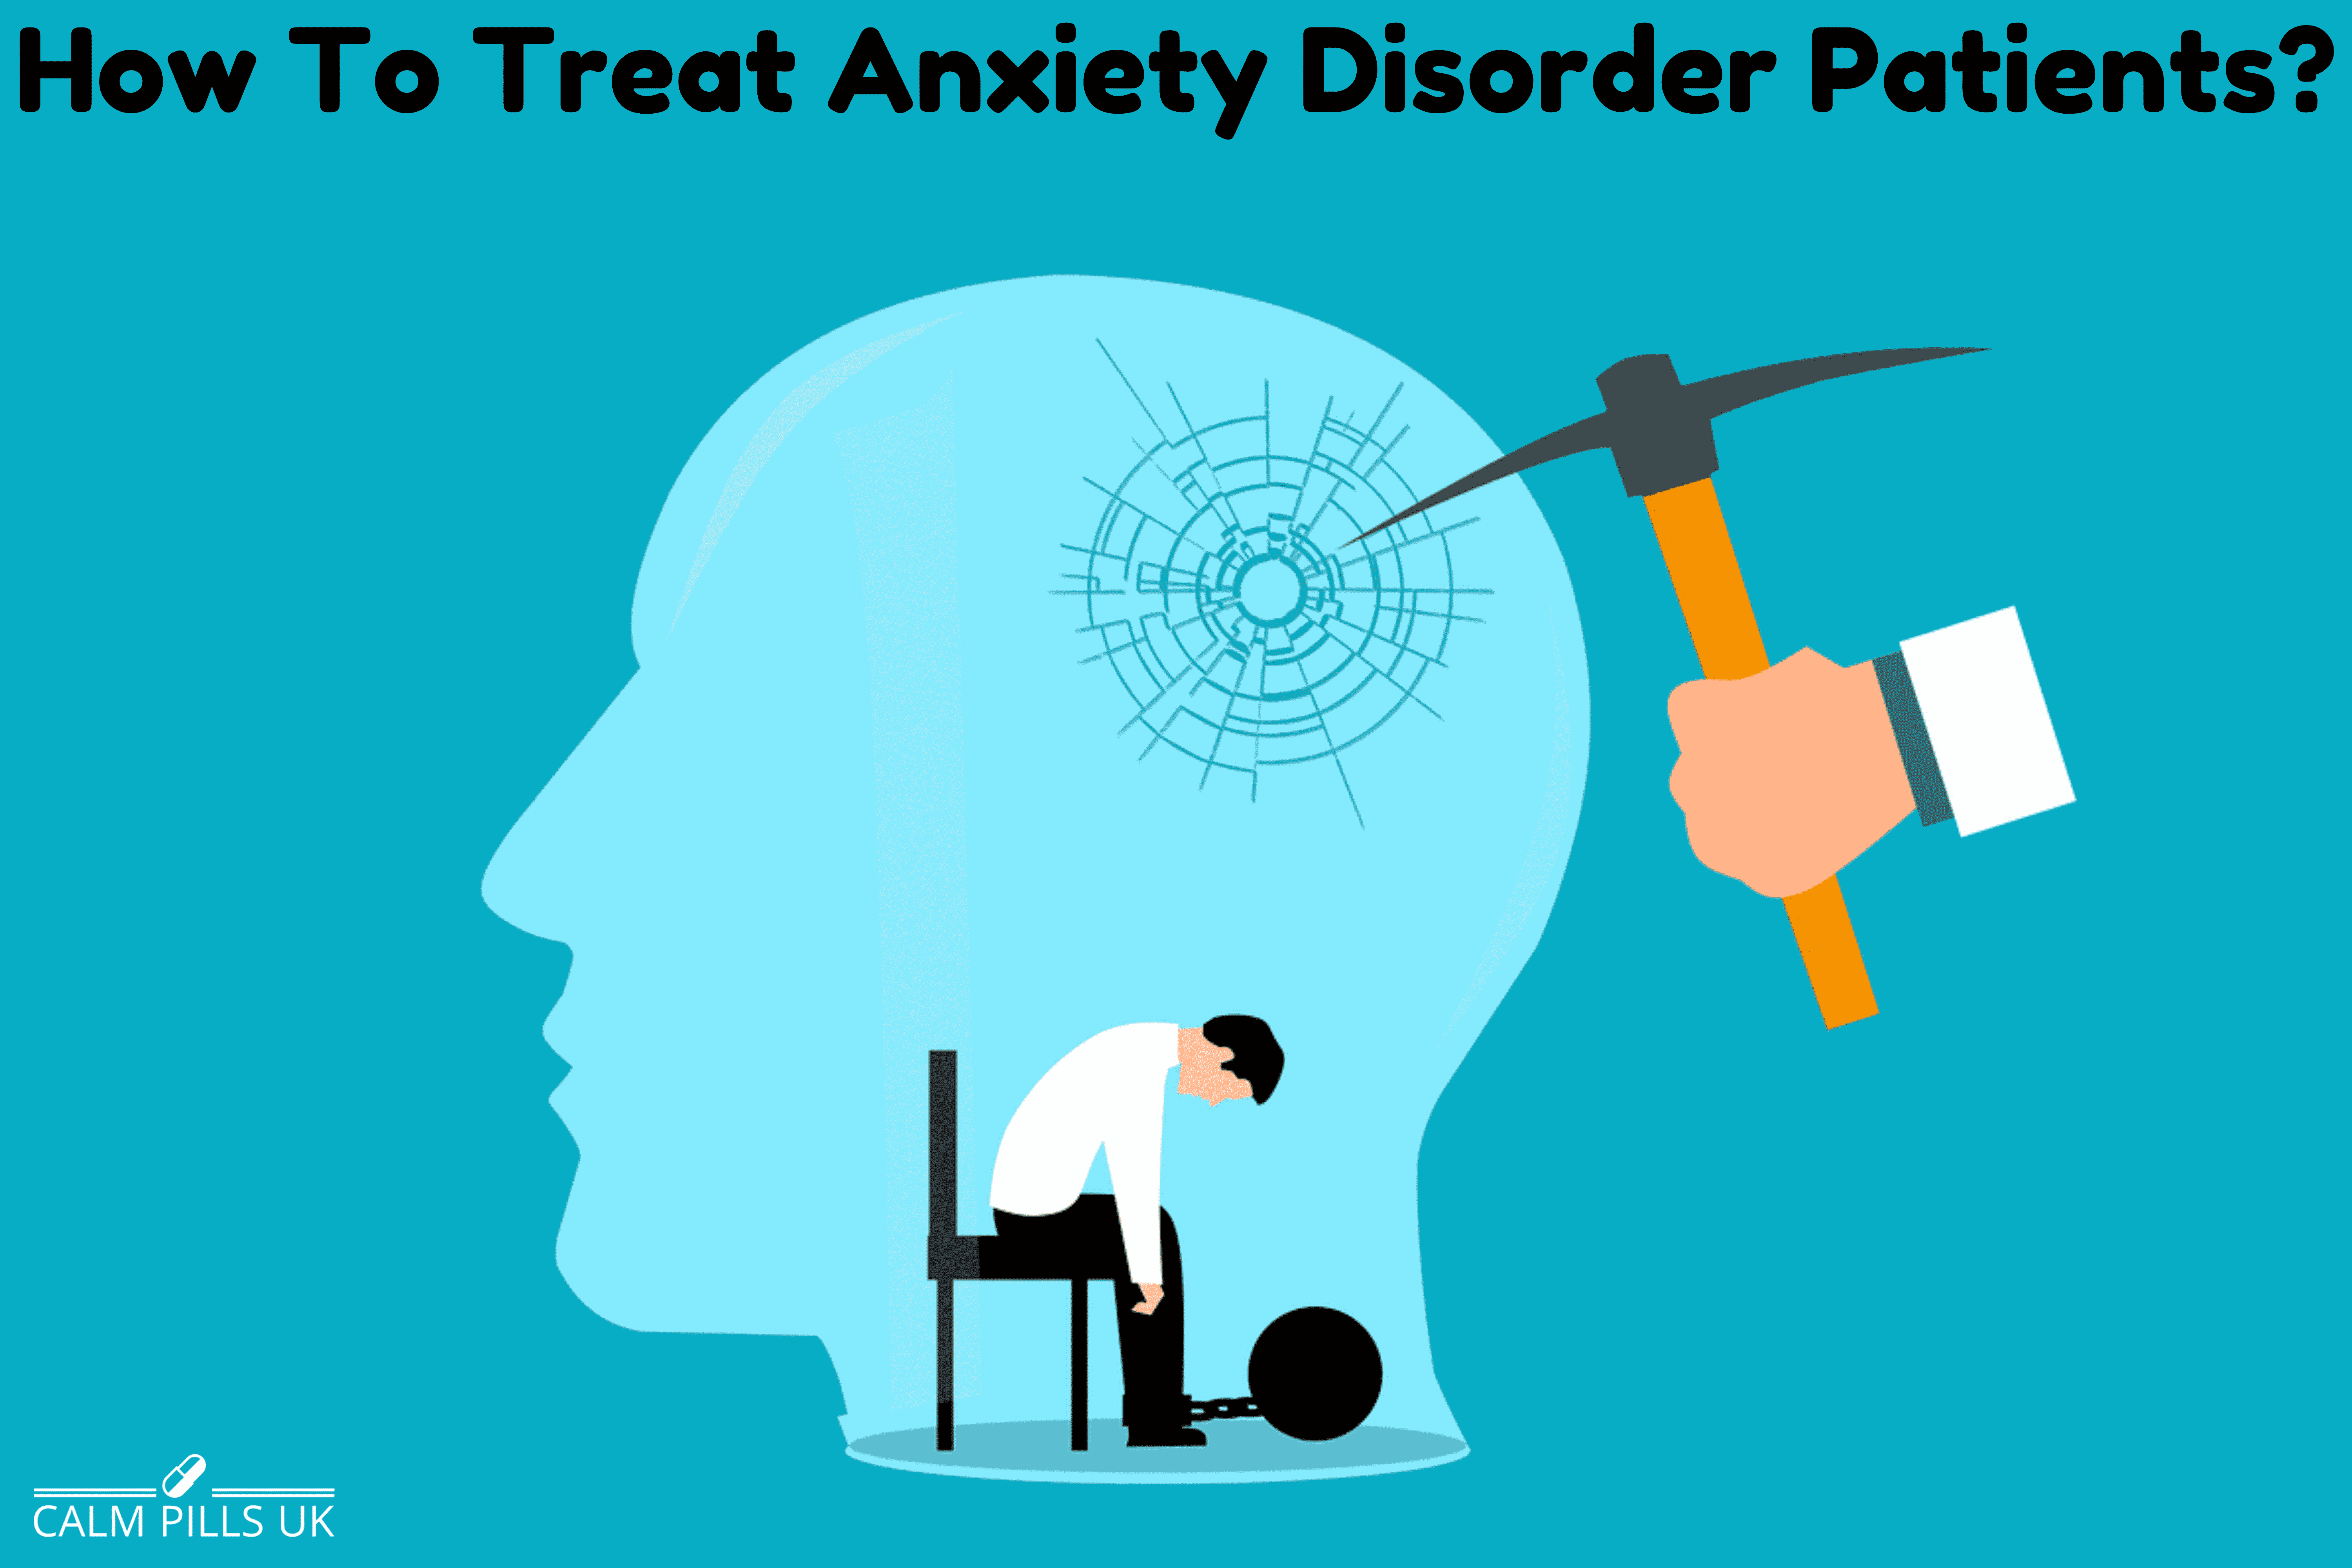 How To Treat Anxiety Disorder Patients?